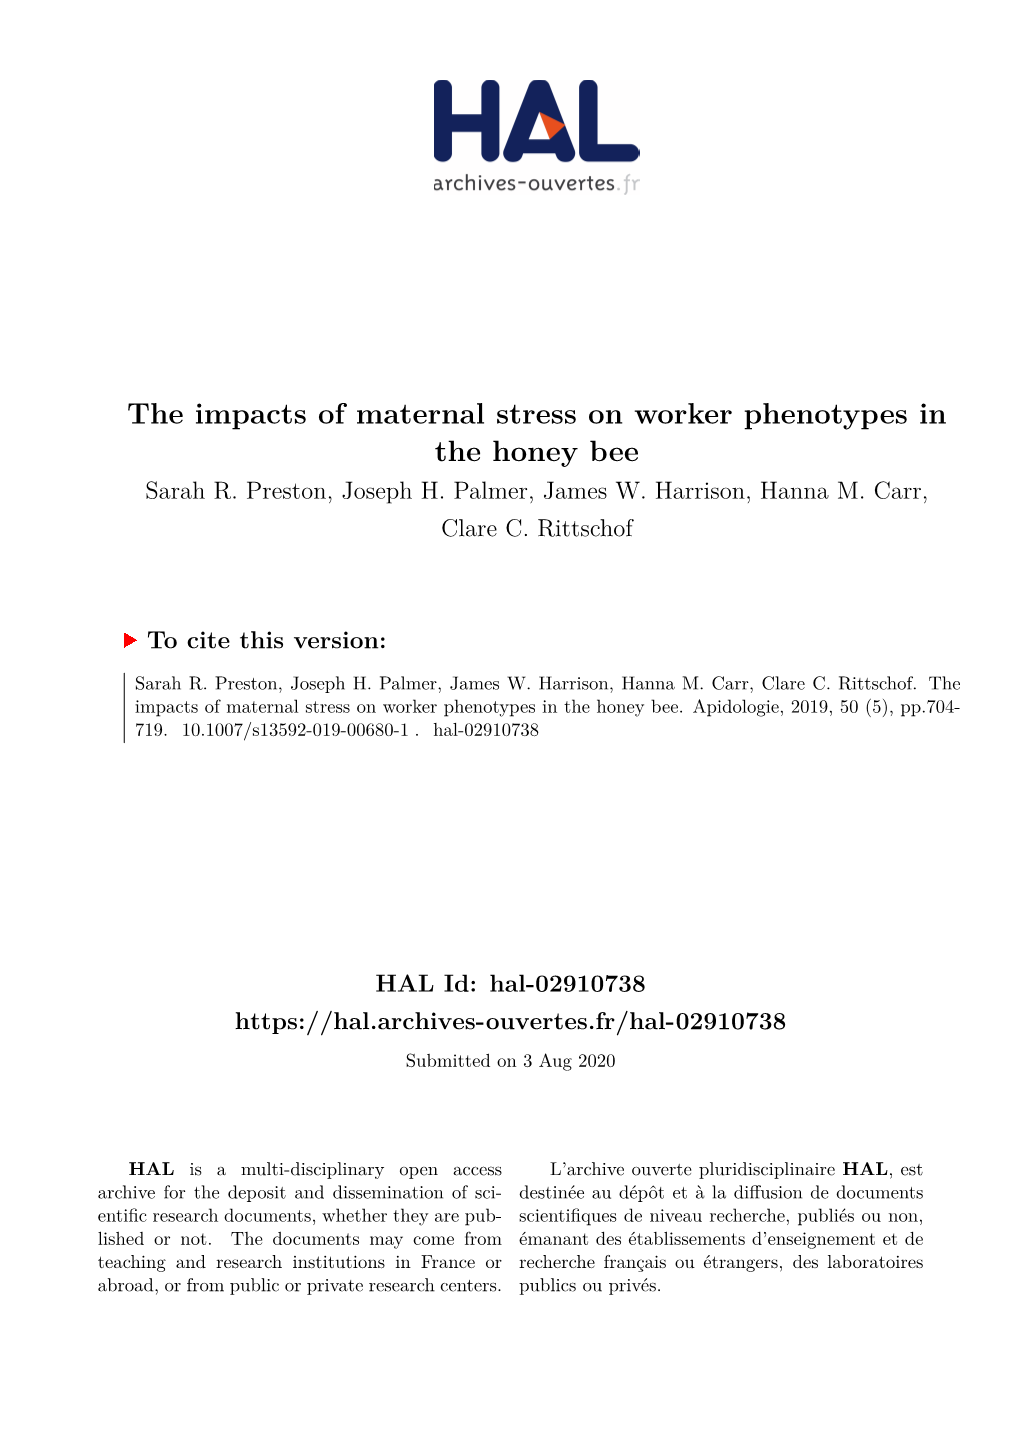 The Impacts of Maternal Stress on Worker Phenotypes in the Honey Bee Sarah R